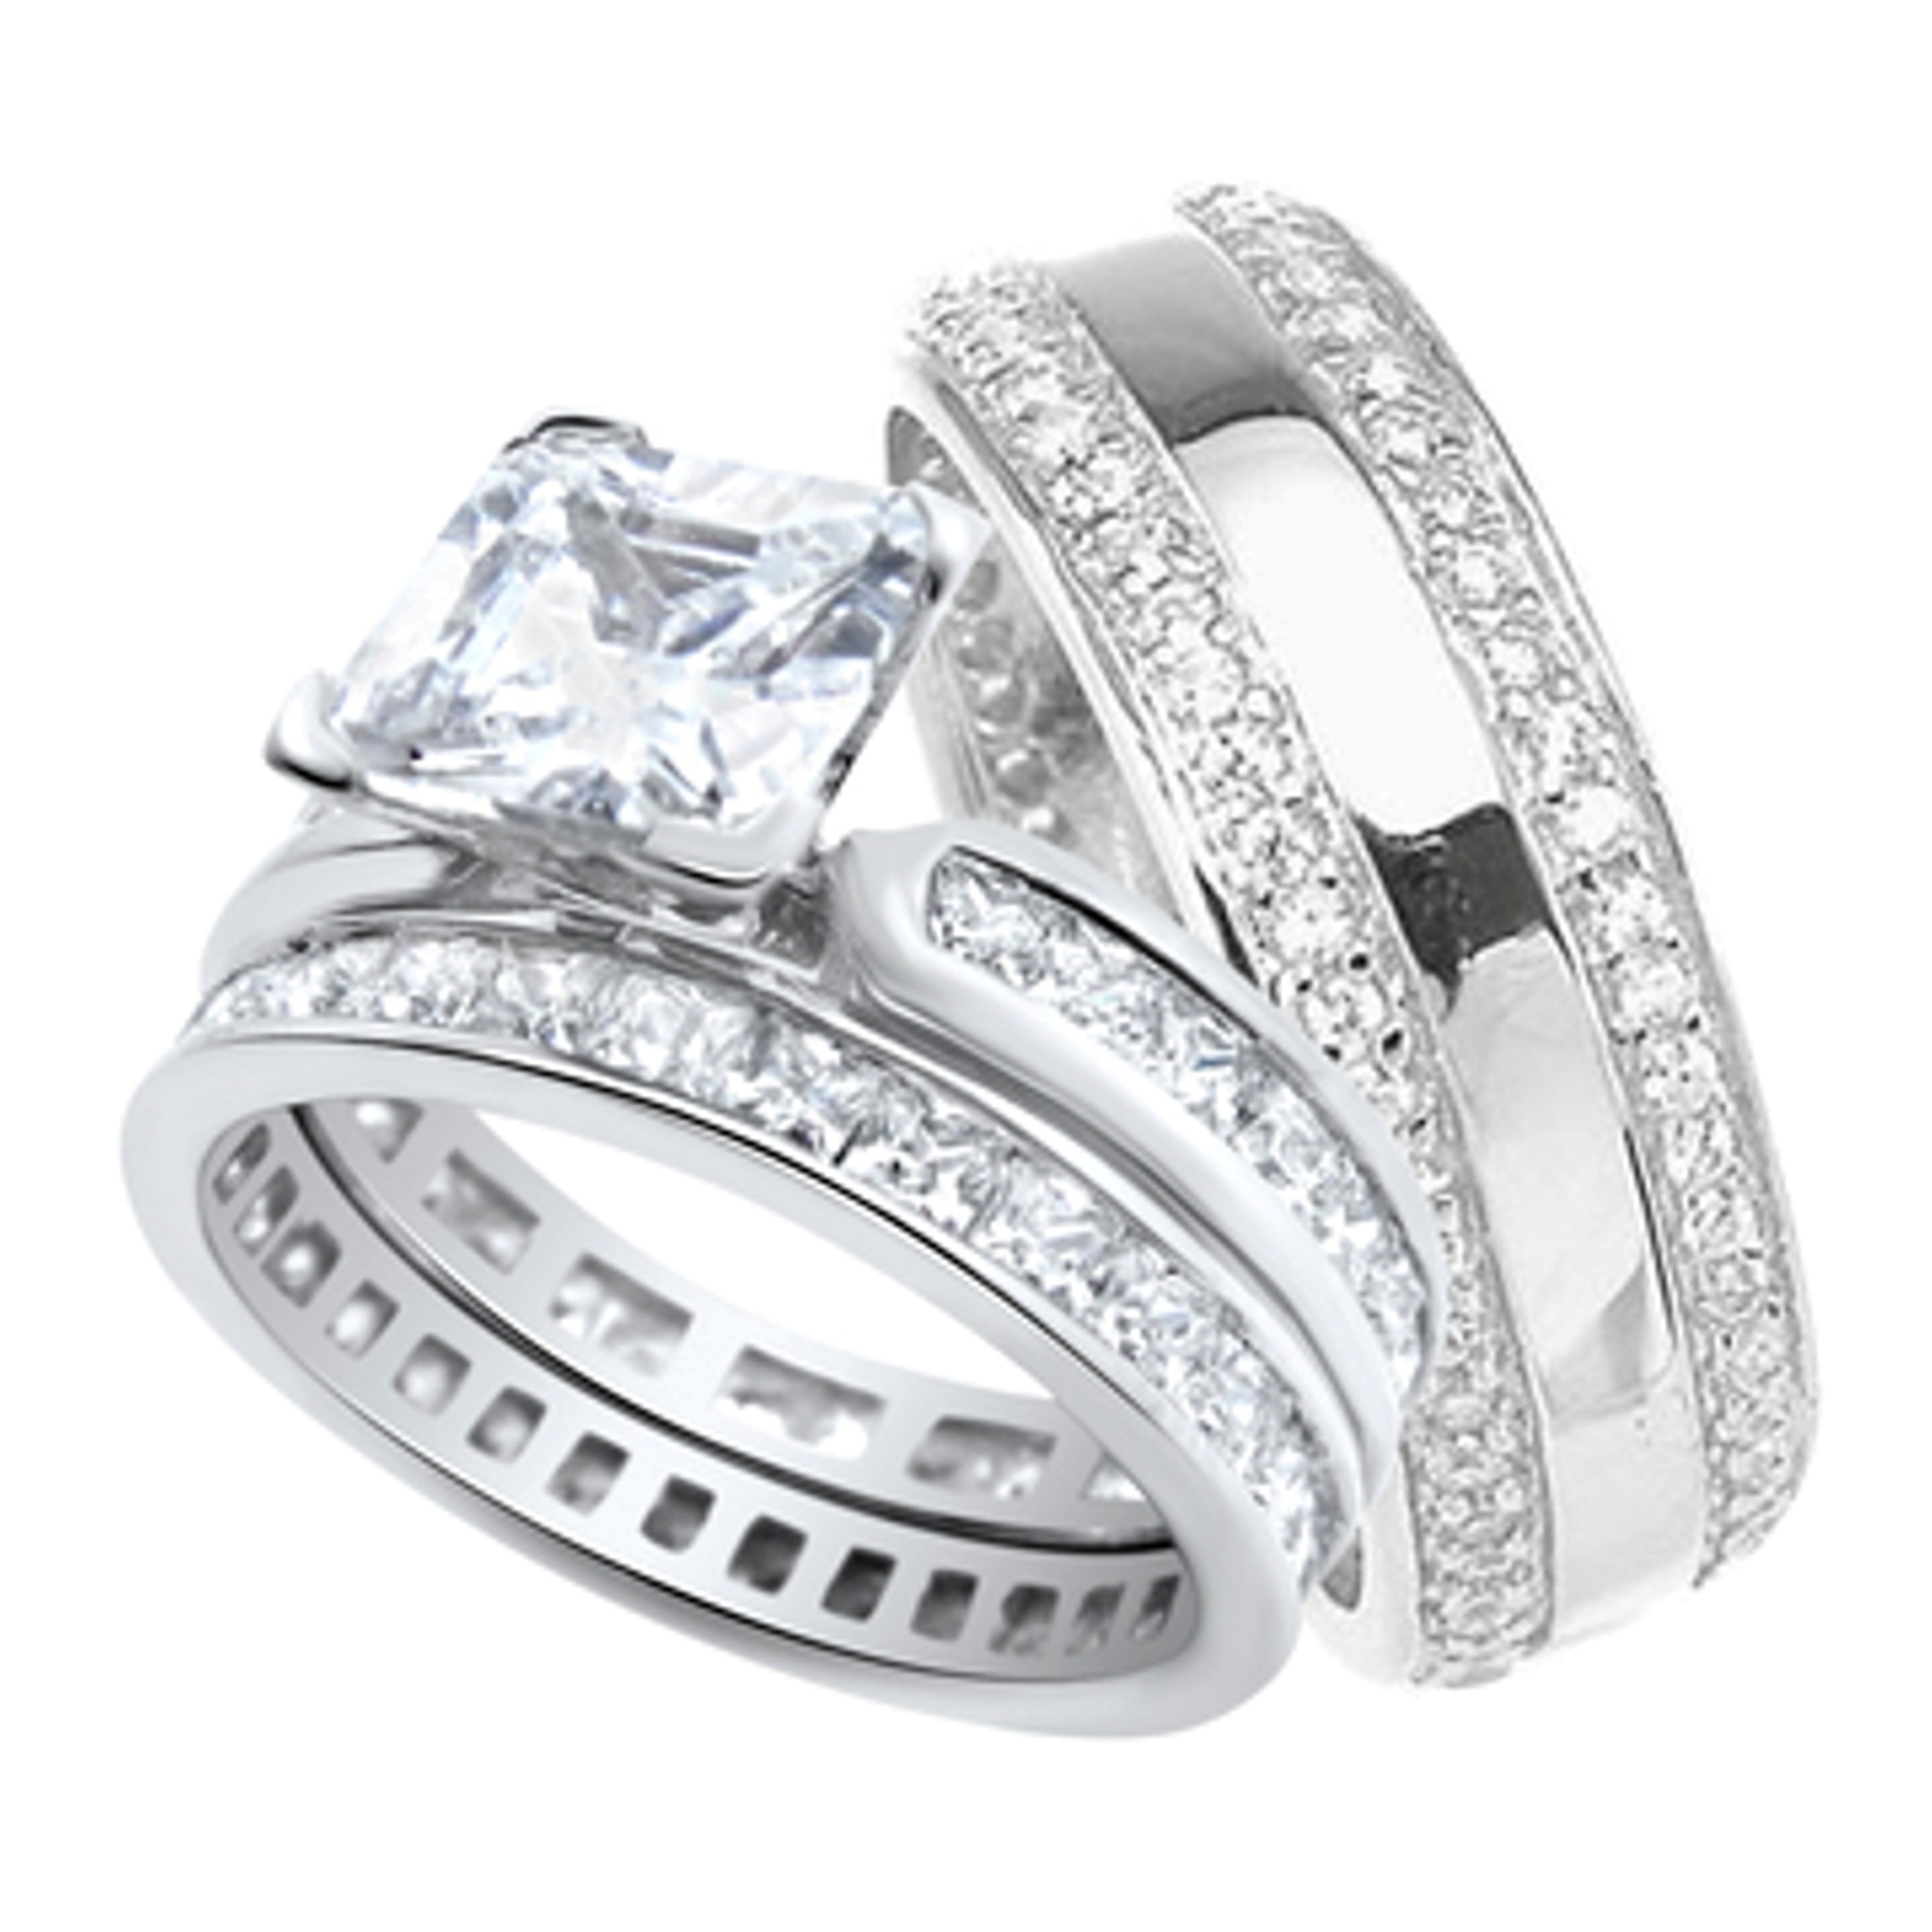 Silver Wedding Rings For Her
 His and Hers Wedding Ring Set Matching Sterling Silver